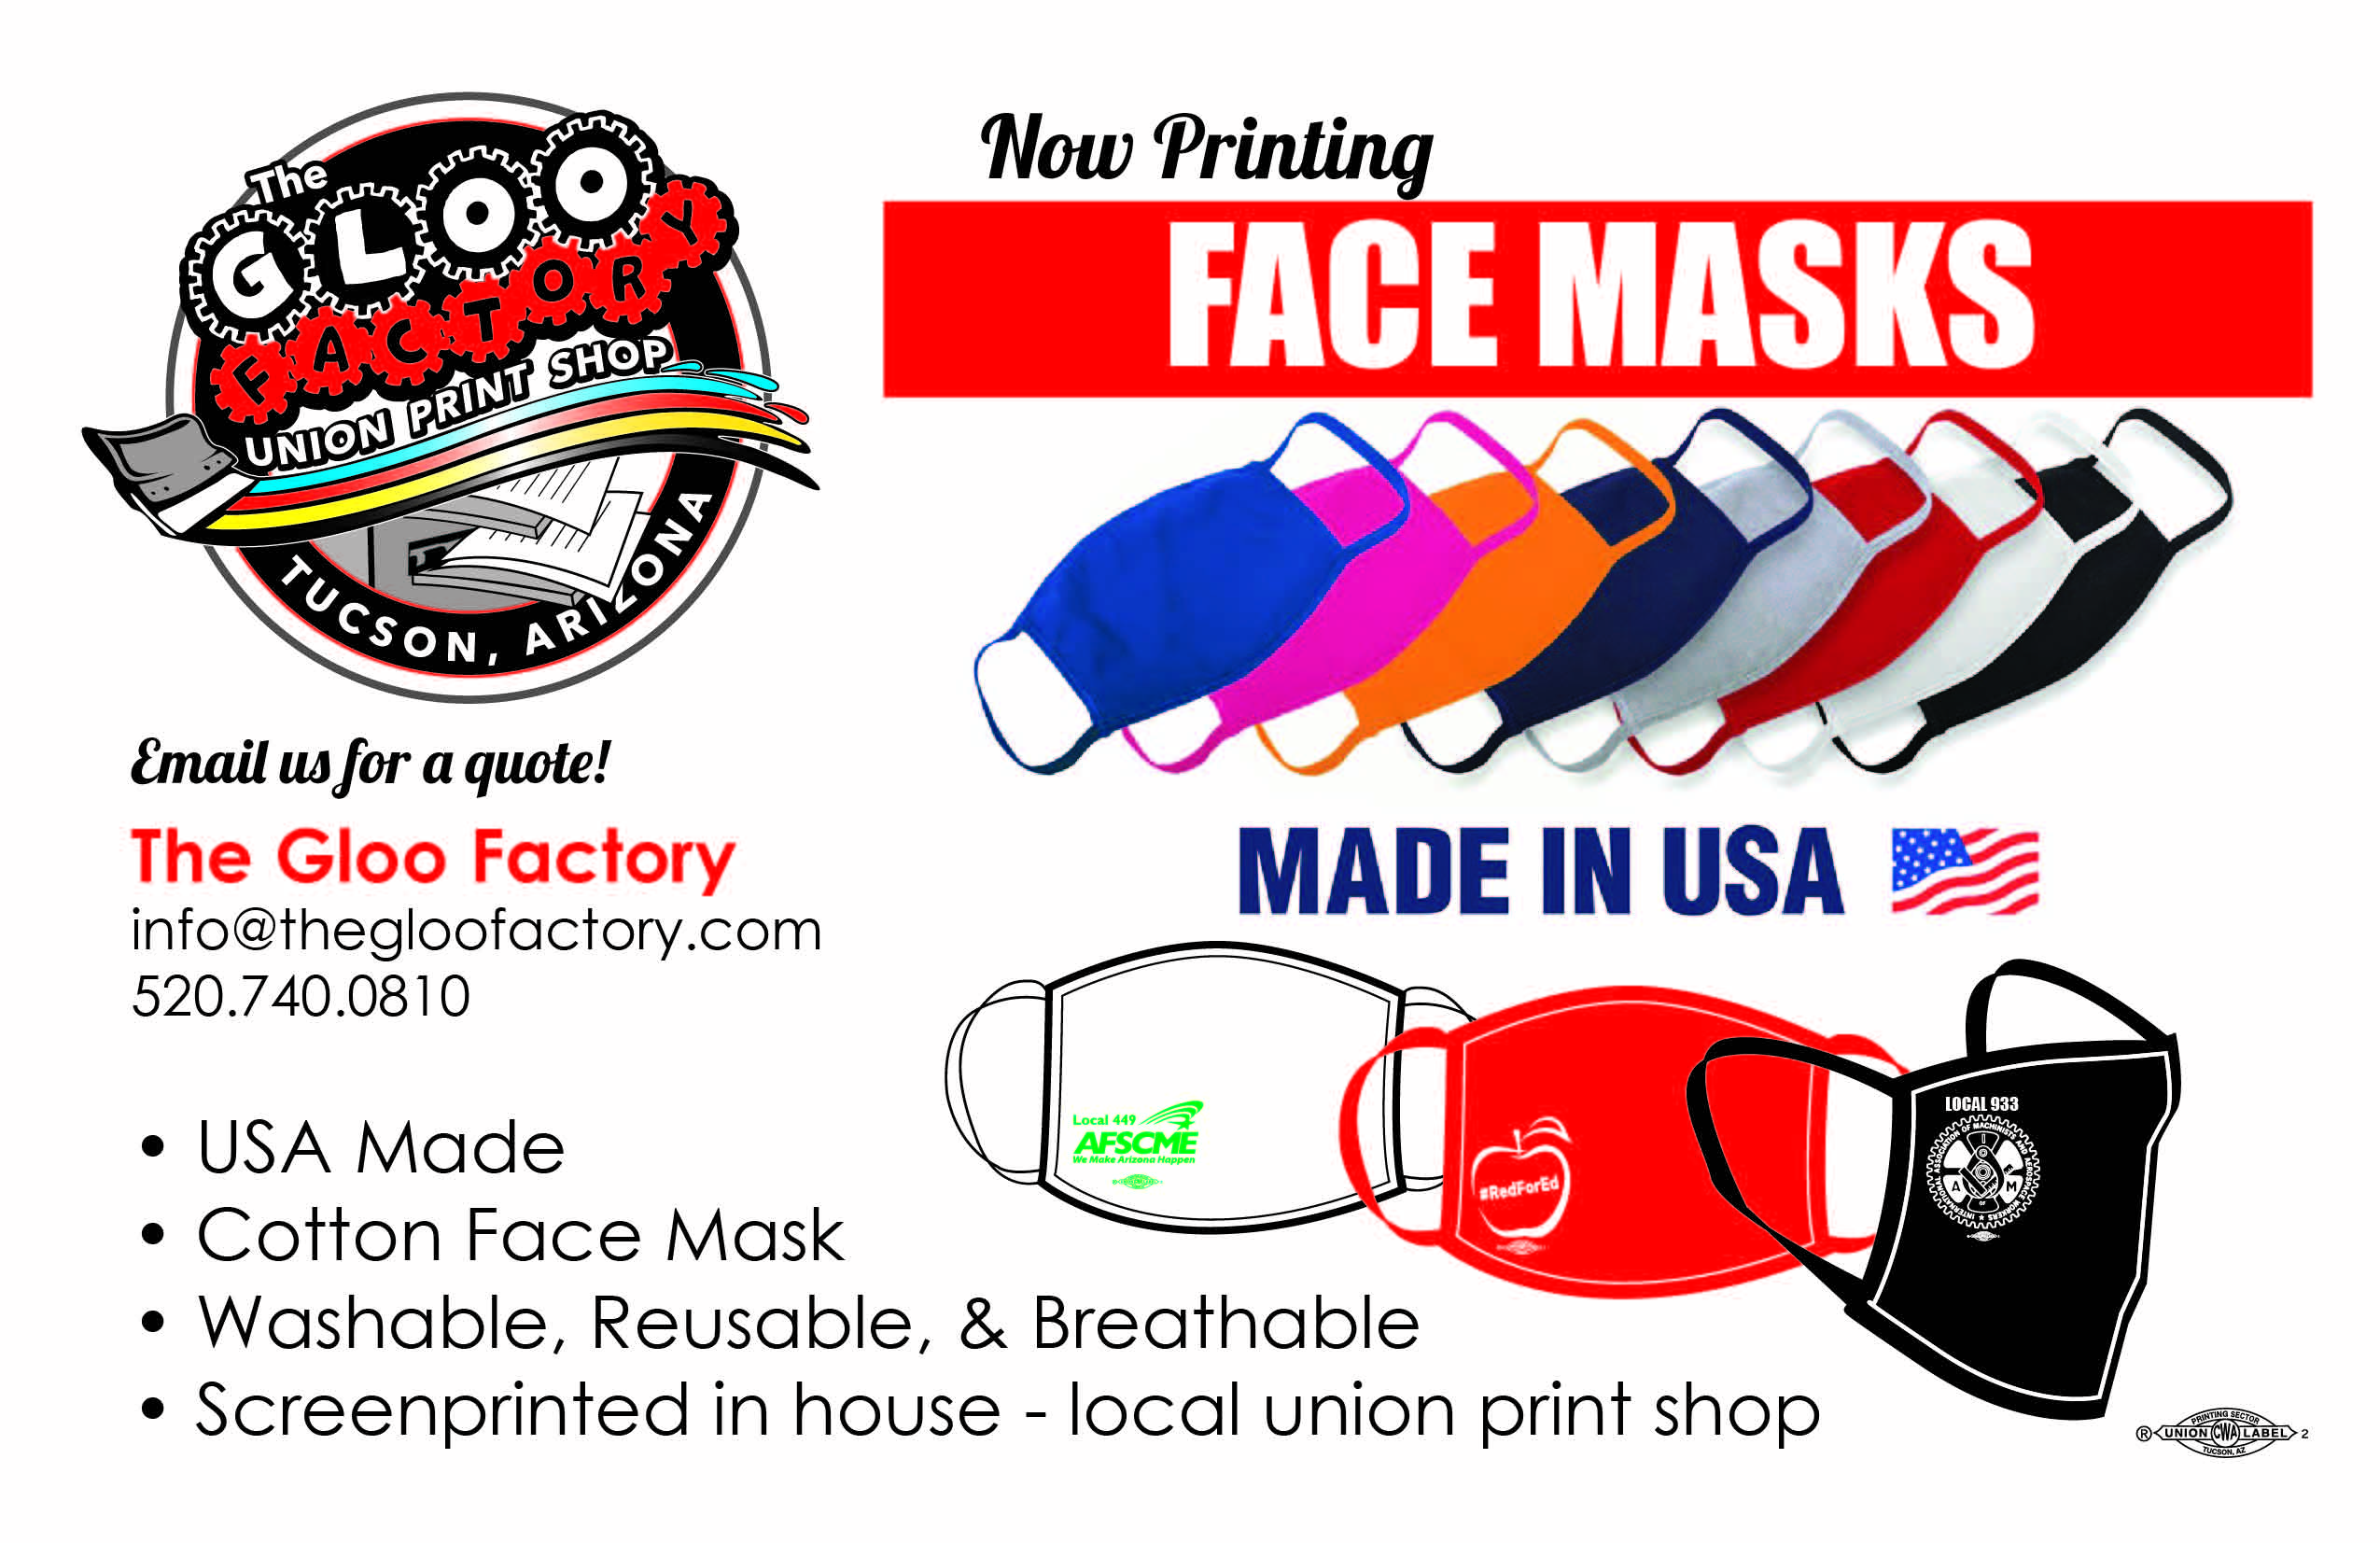 The Gloo Factory Union Print Shop in Tucson, Arizona is now screen printing custom cotton face masks!